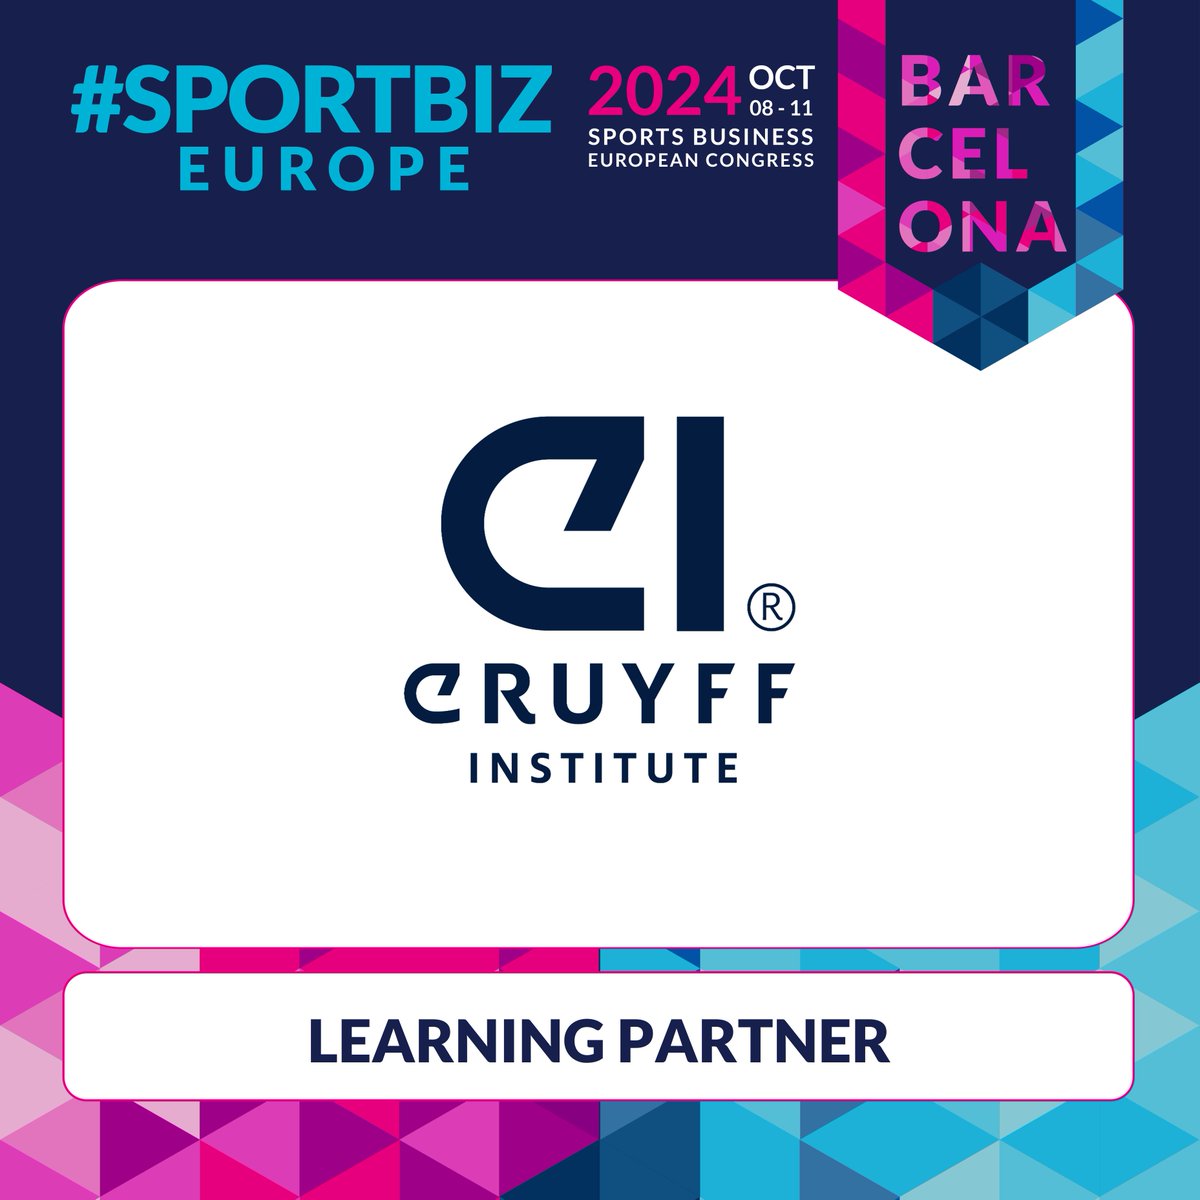 Welcome @CruyffInstitute, Learning Partner of SPORTBIZ EUROPE! The Sports Business European Congress returns to Barcelona this October, from 8th to 11th. Be part of it! #SPORTBIZEUROPE #SPORTBIZ #EducatingLeaders #CruyffInstitute